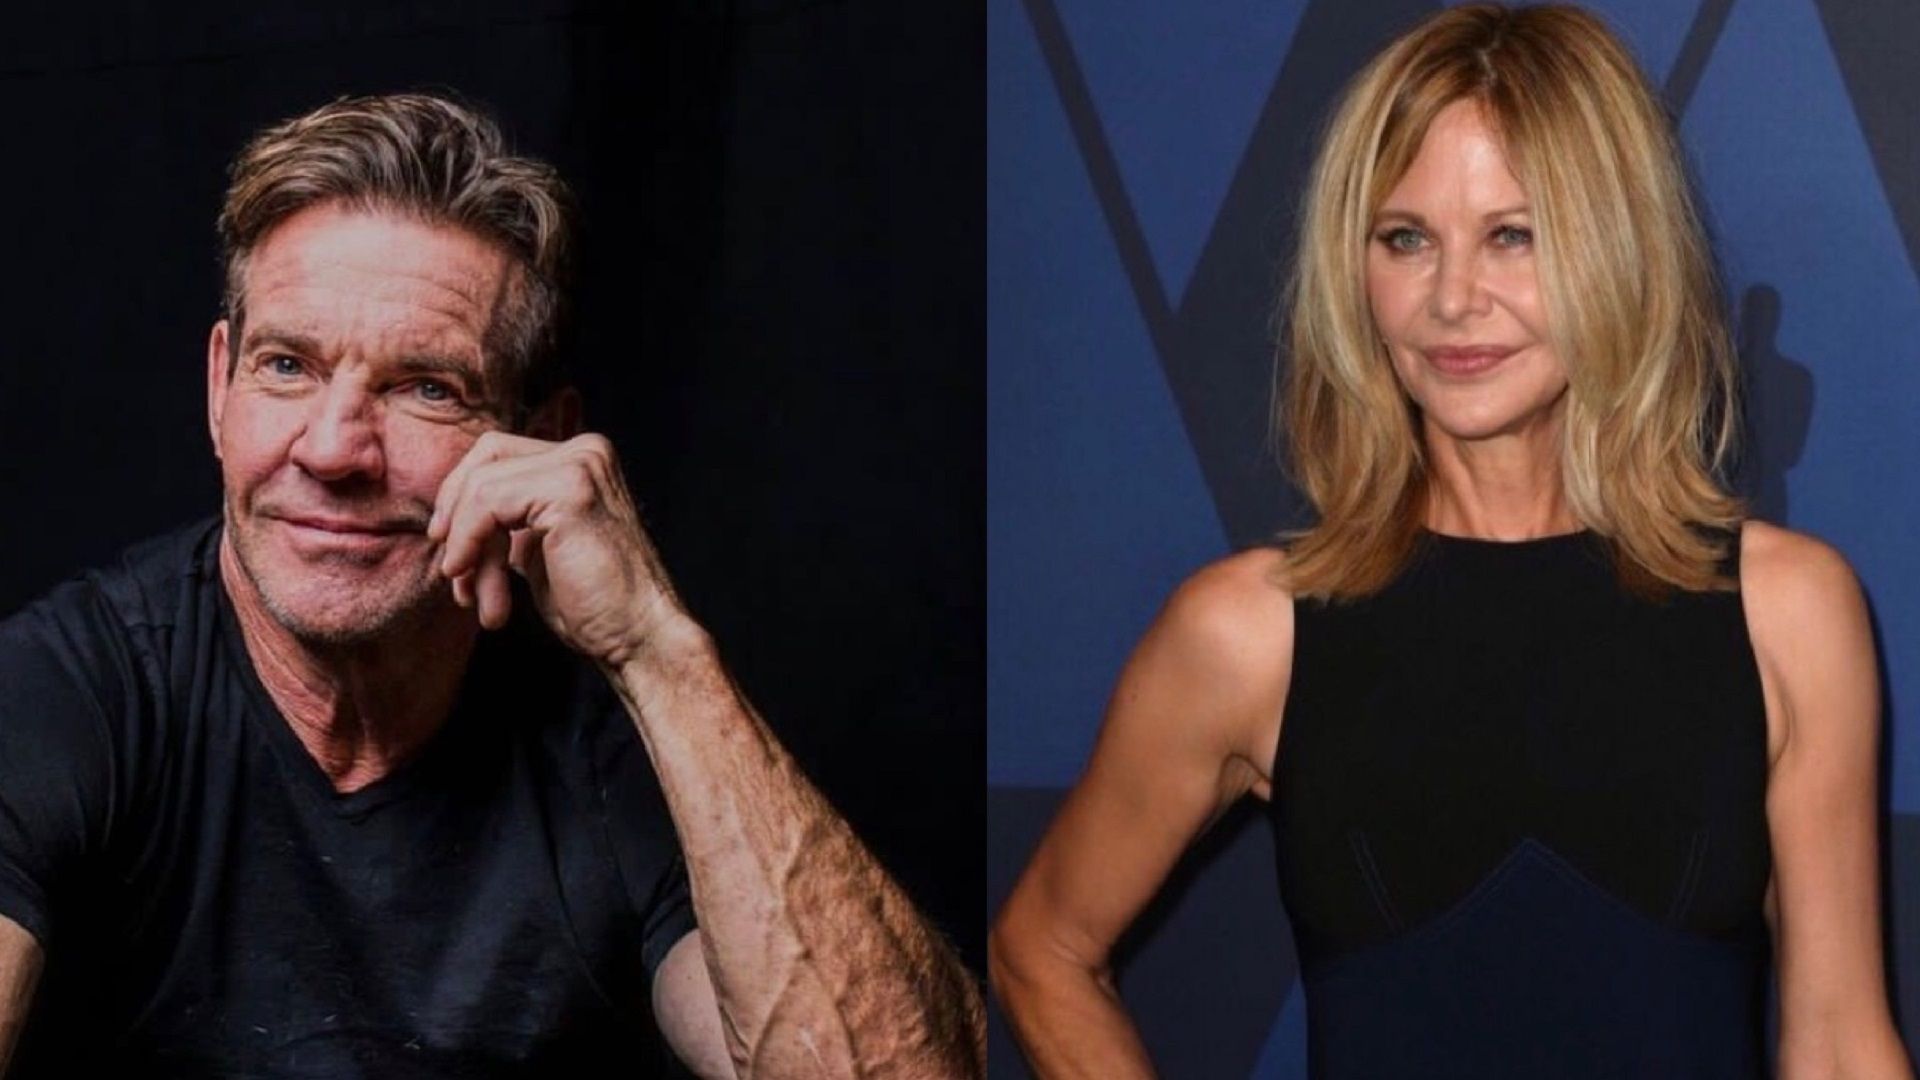 Couples who got engaged or married on Valentine's Day: Meg Ryan and Dennis Quaid